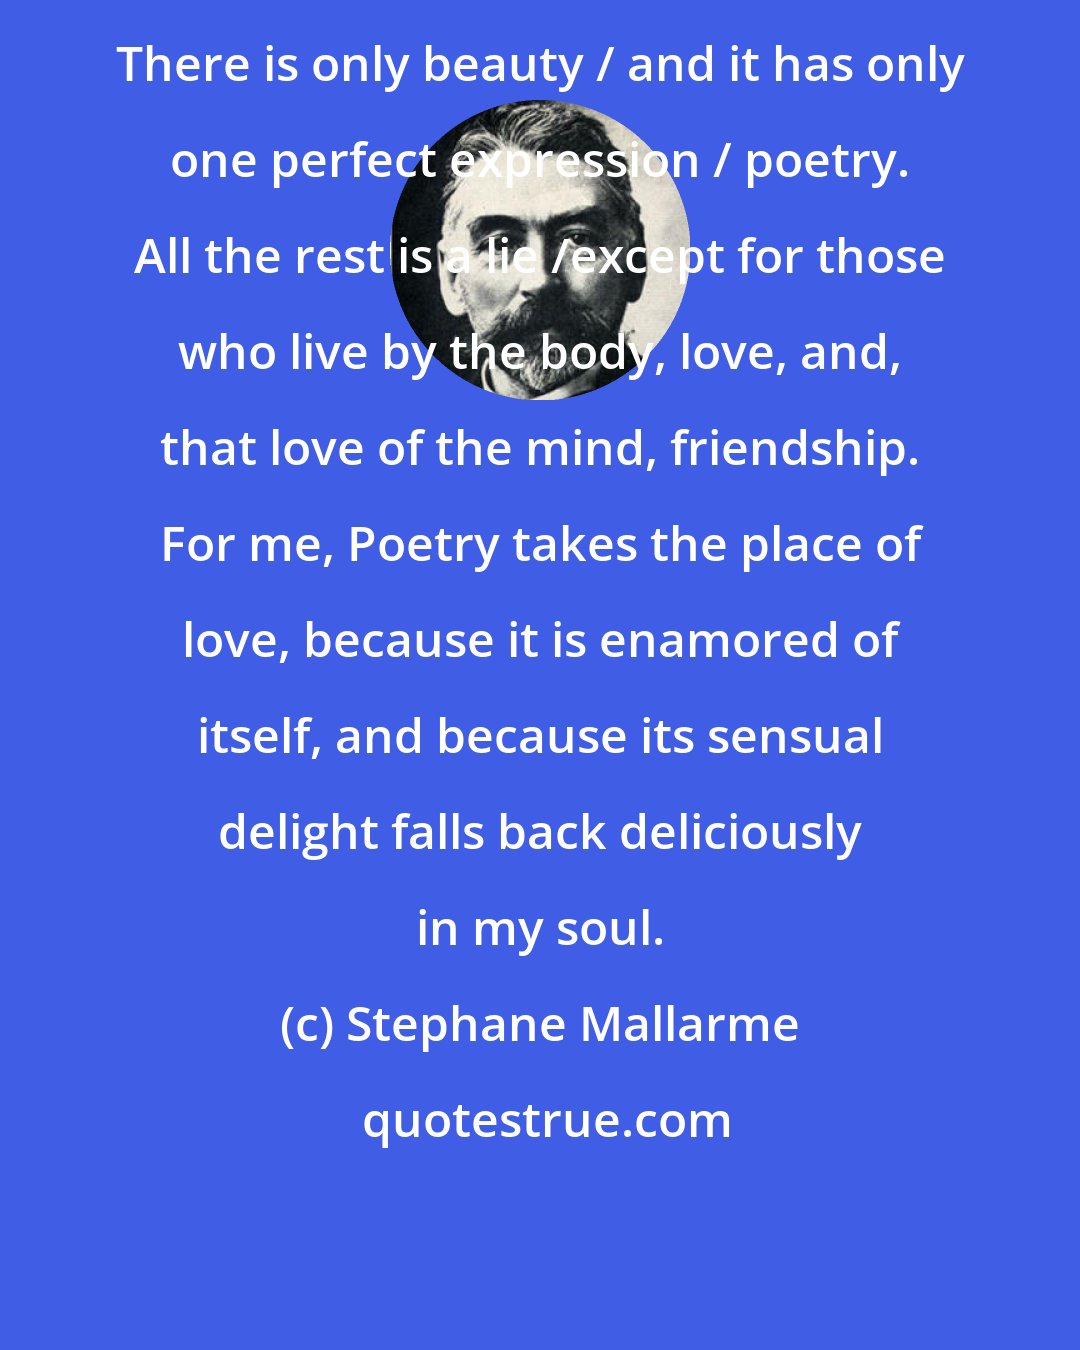 Stephane Mallarme: There is only beauty / and it has only one perfect expression / poetry. All the rest is a lie /except for those who live by the body, love, and, that love of the mind, friendship. For me, Poetry takes the place of love, because it is enamored of itself, and because its sensual delight falls back deliciously in my soul.